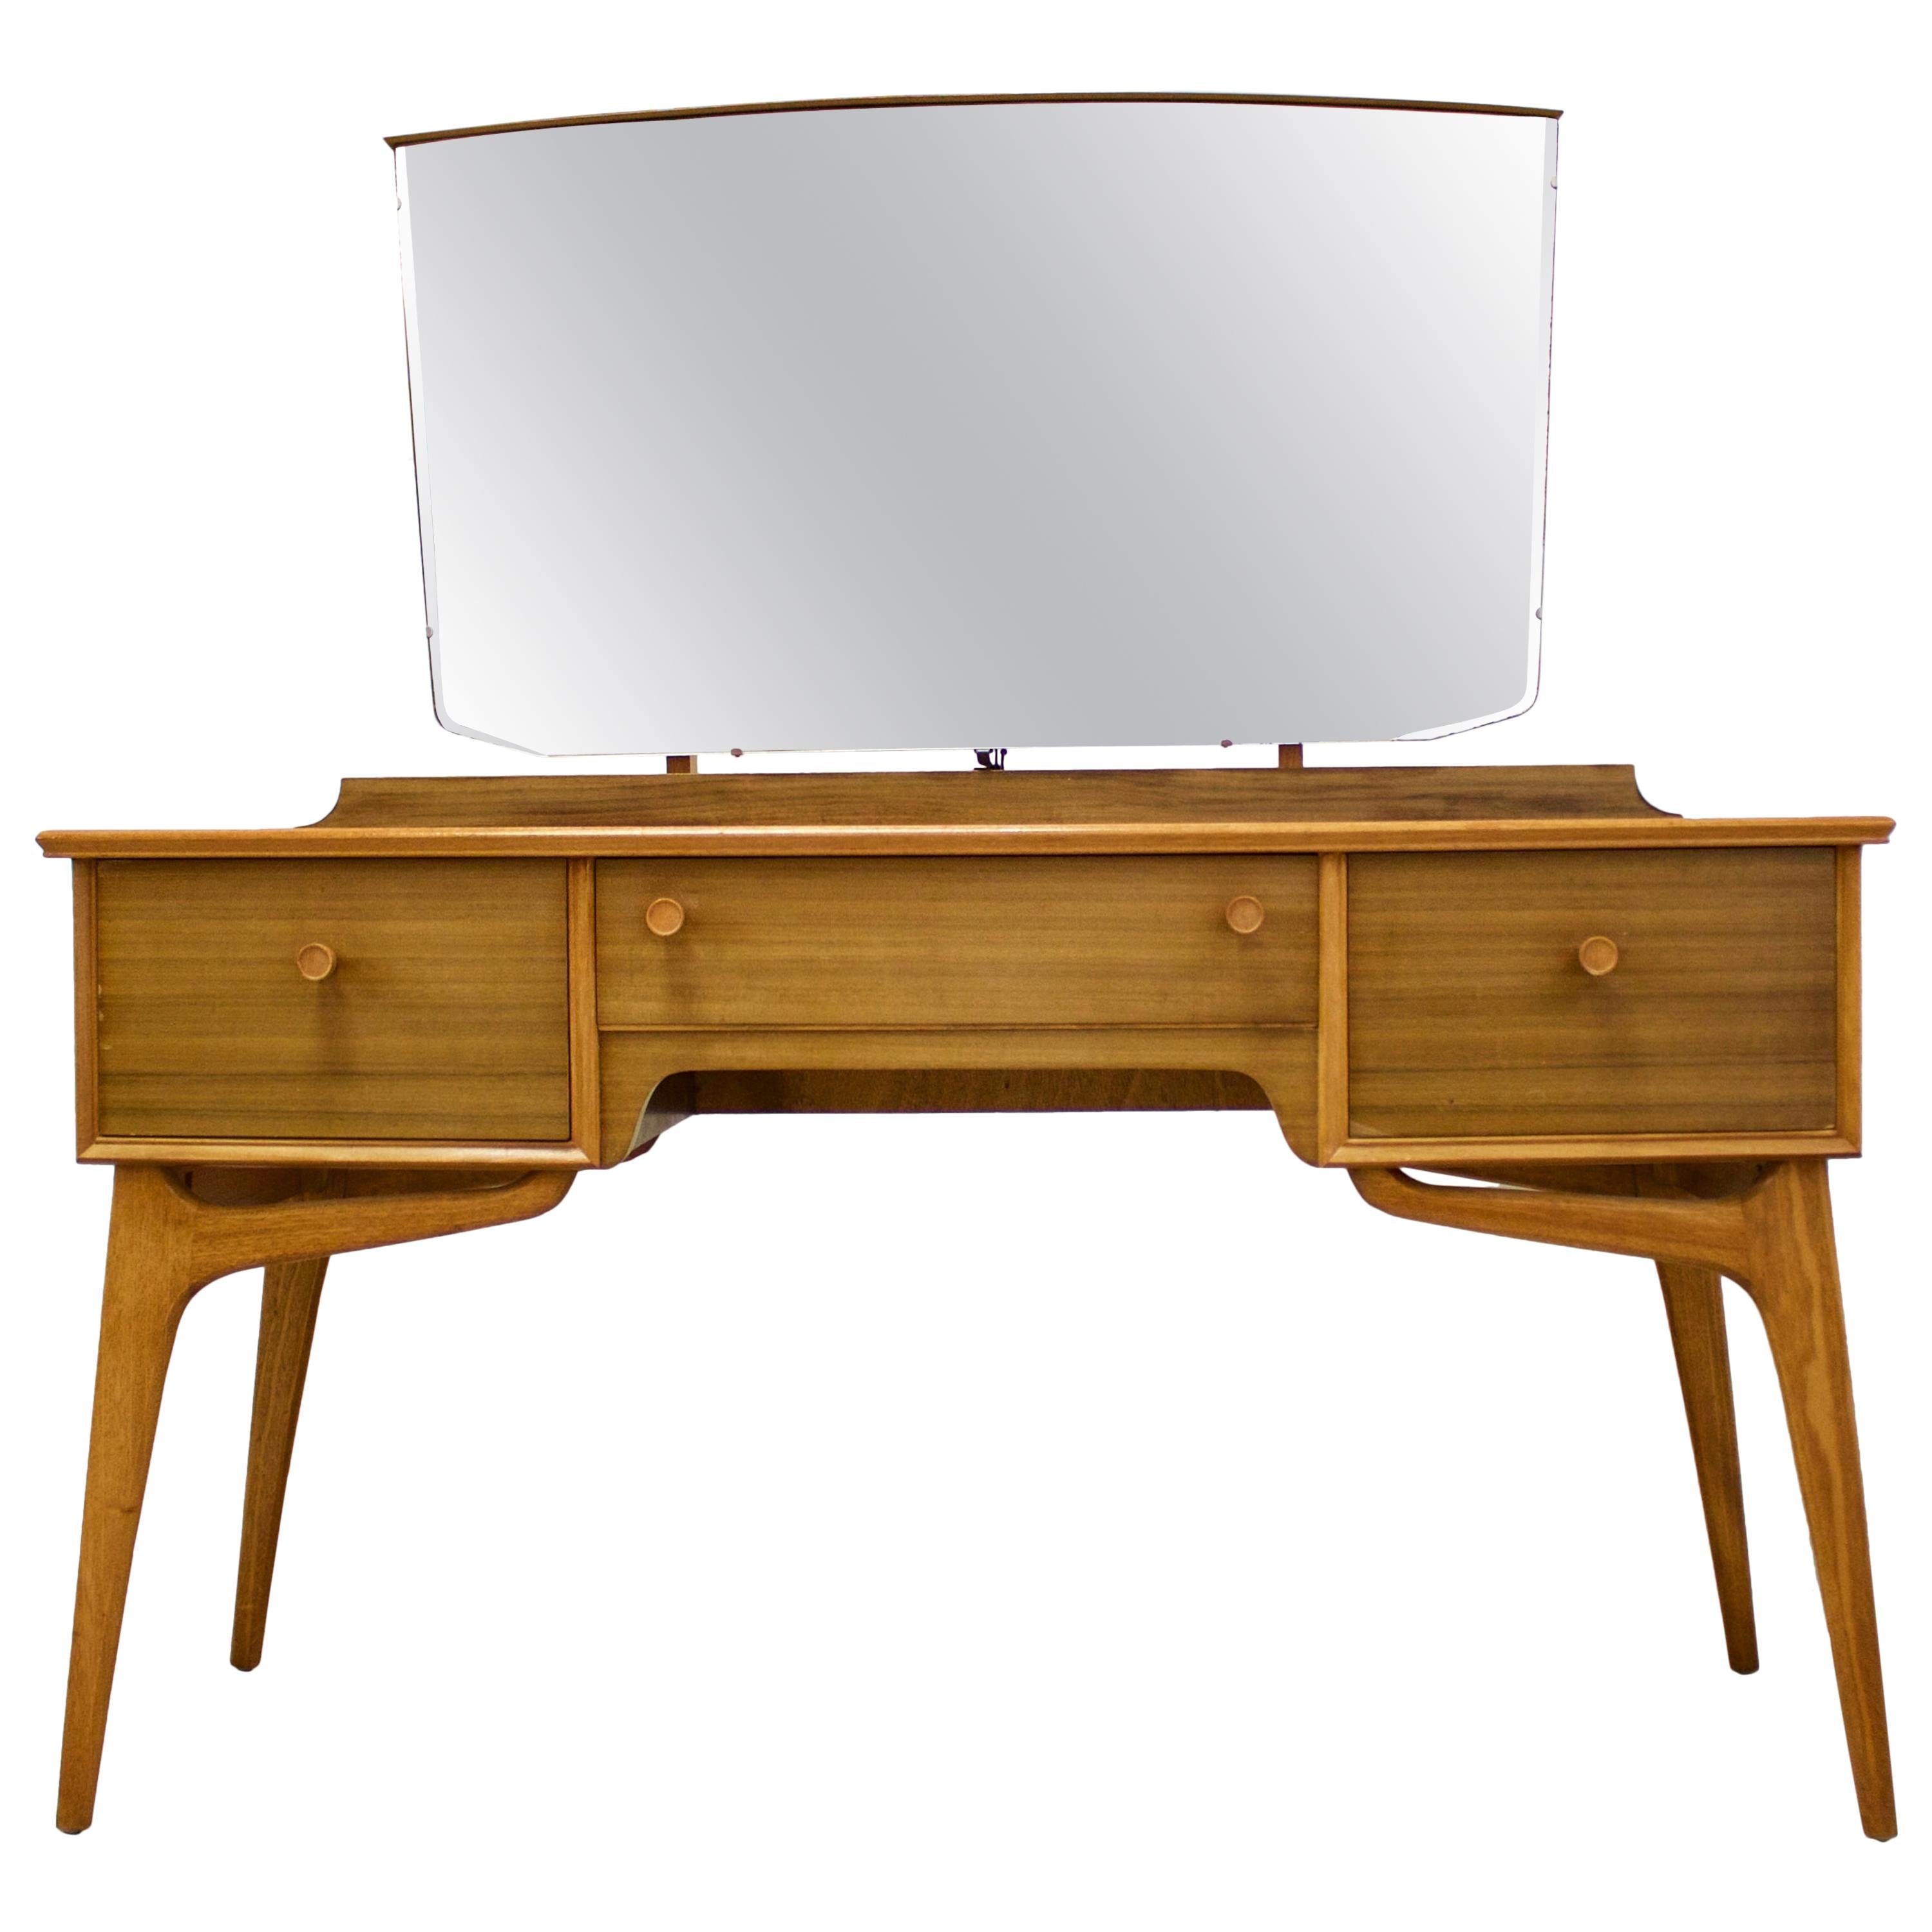 Walnut Dressing Table by Alfred Cox for Heal's, 1950s